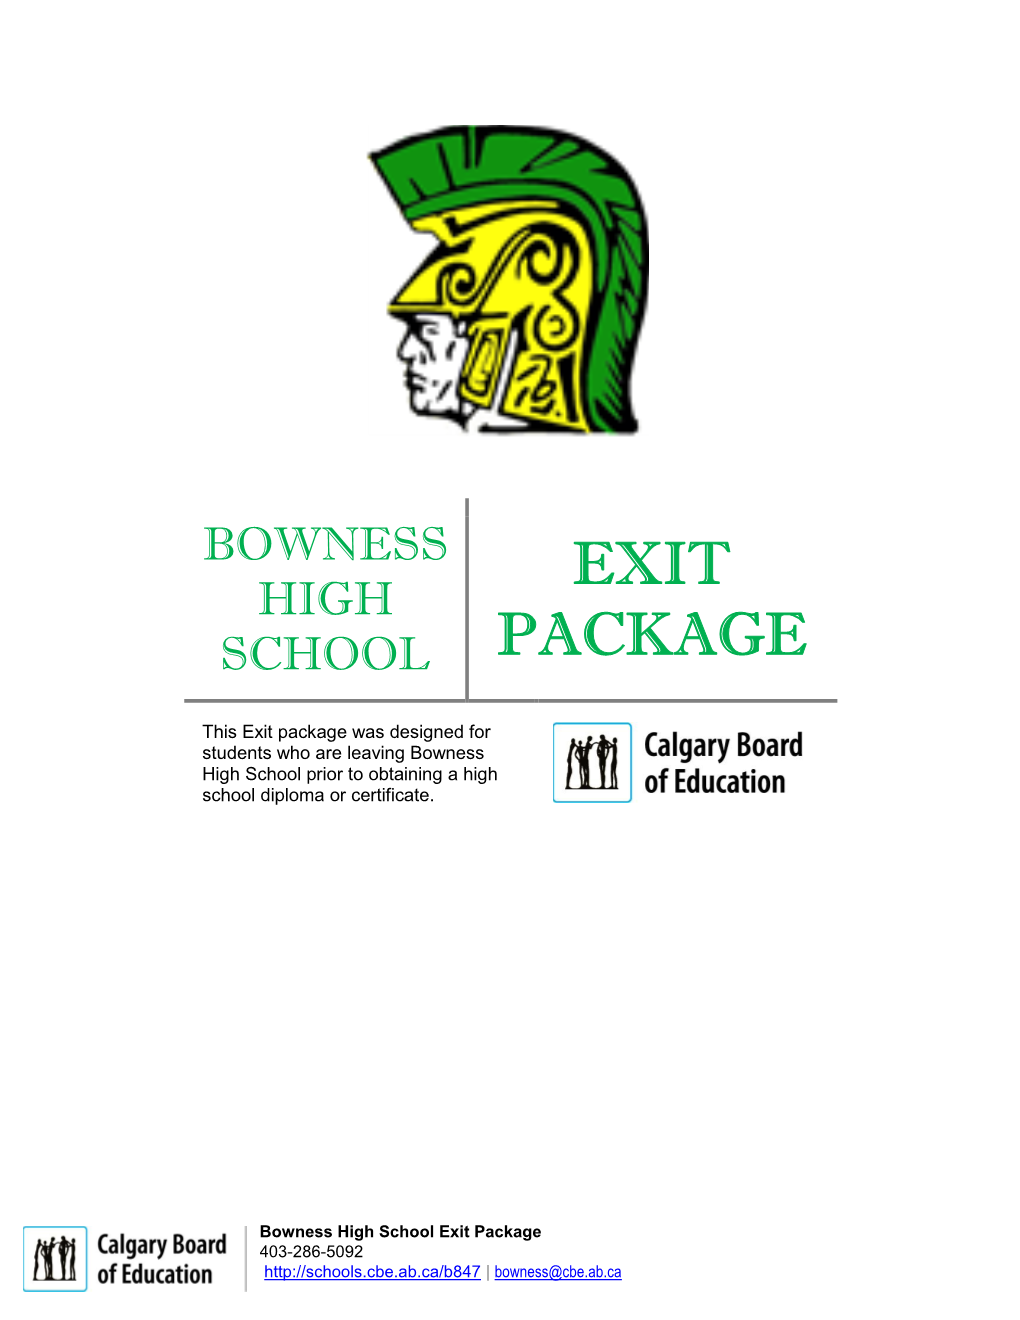 Bowness High School Prior to Obtaining a High School Diploma Or Certificate